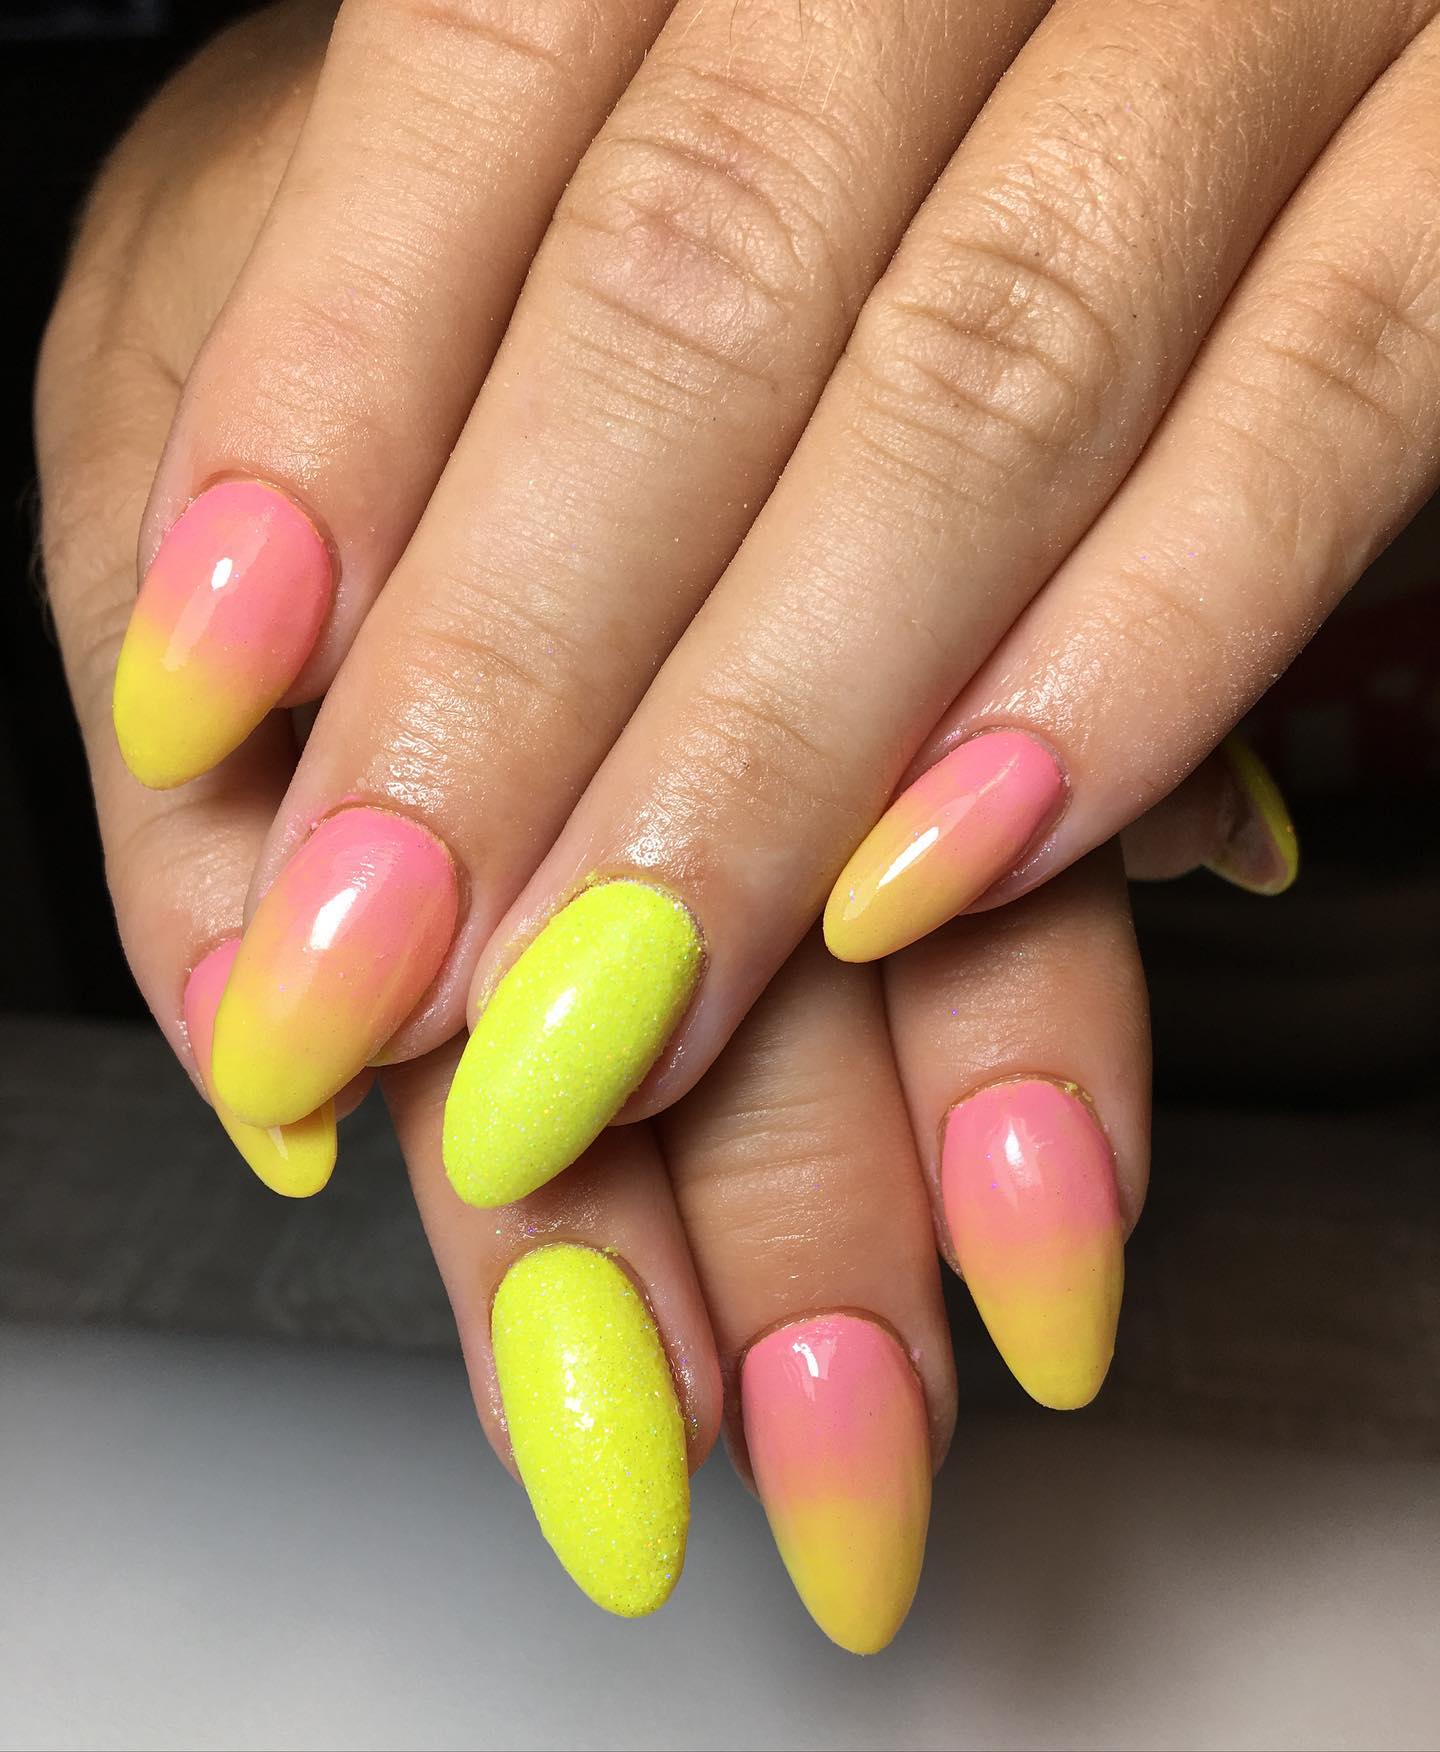 40+ Pretty Ideas for Pink and Yellow Nails that Turn Heads - Nail ...